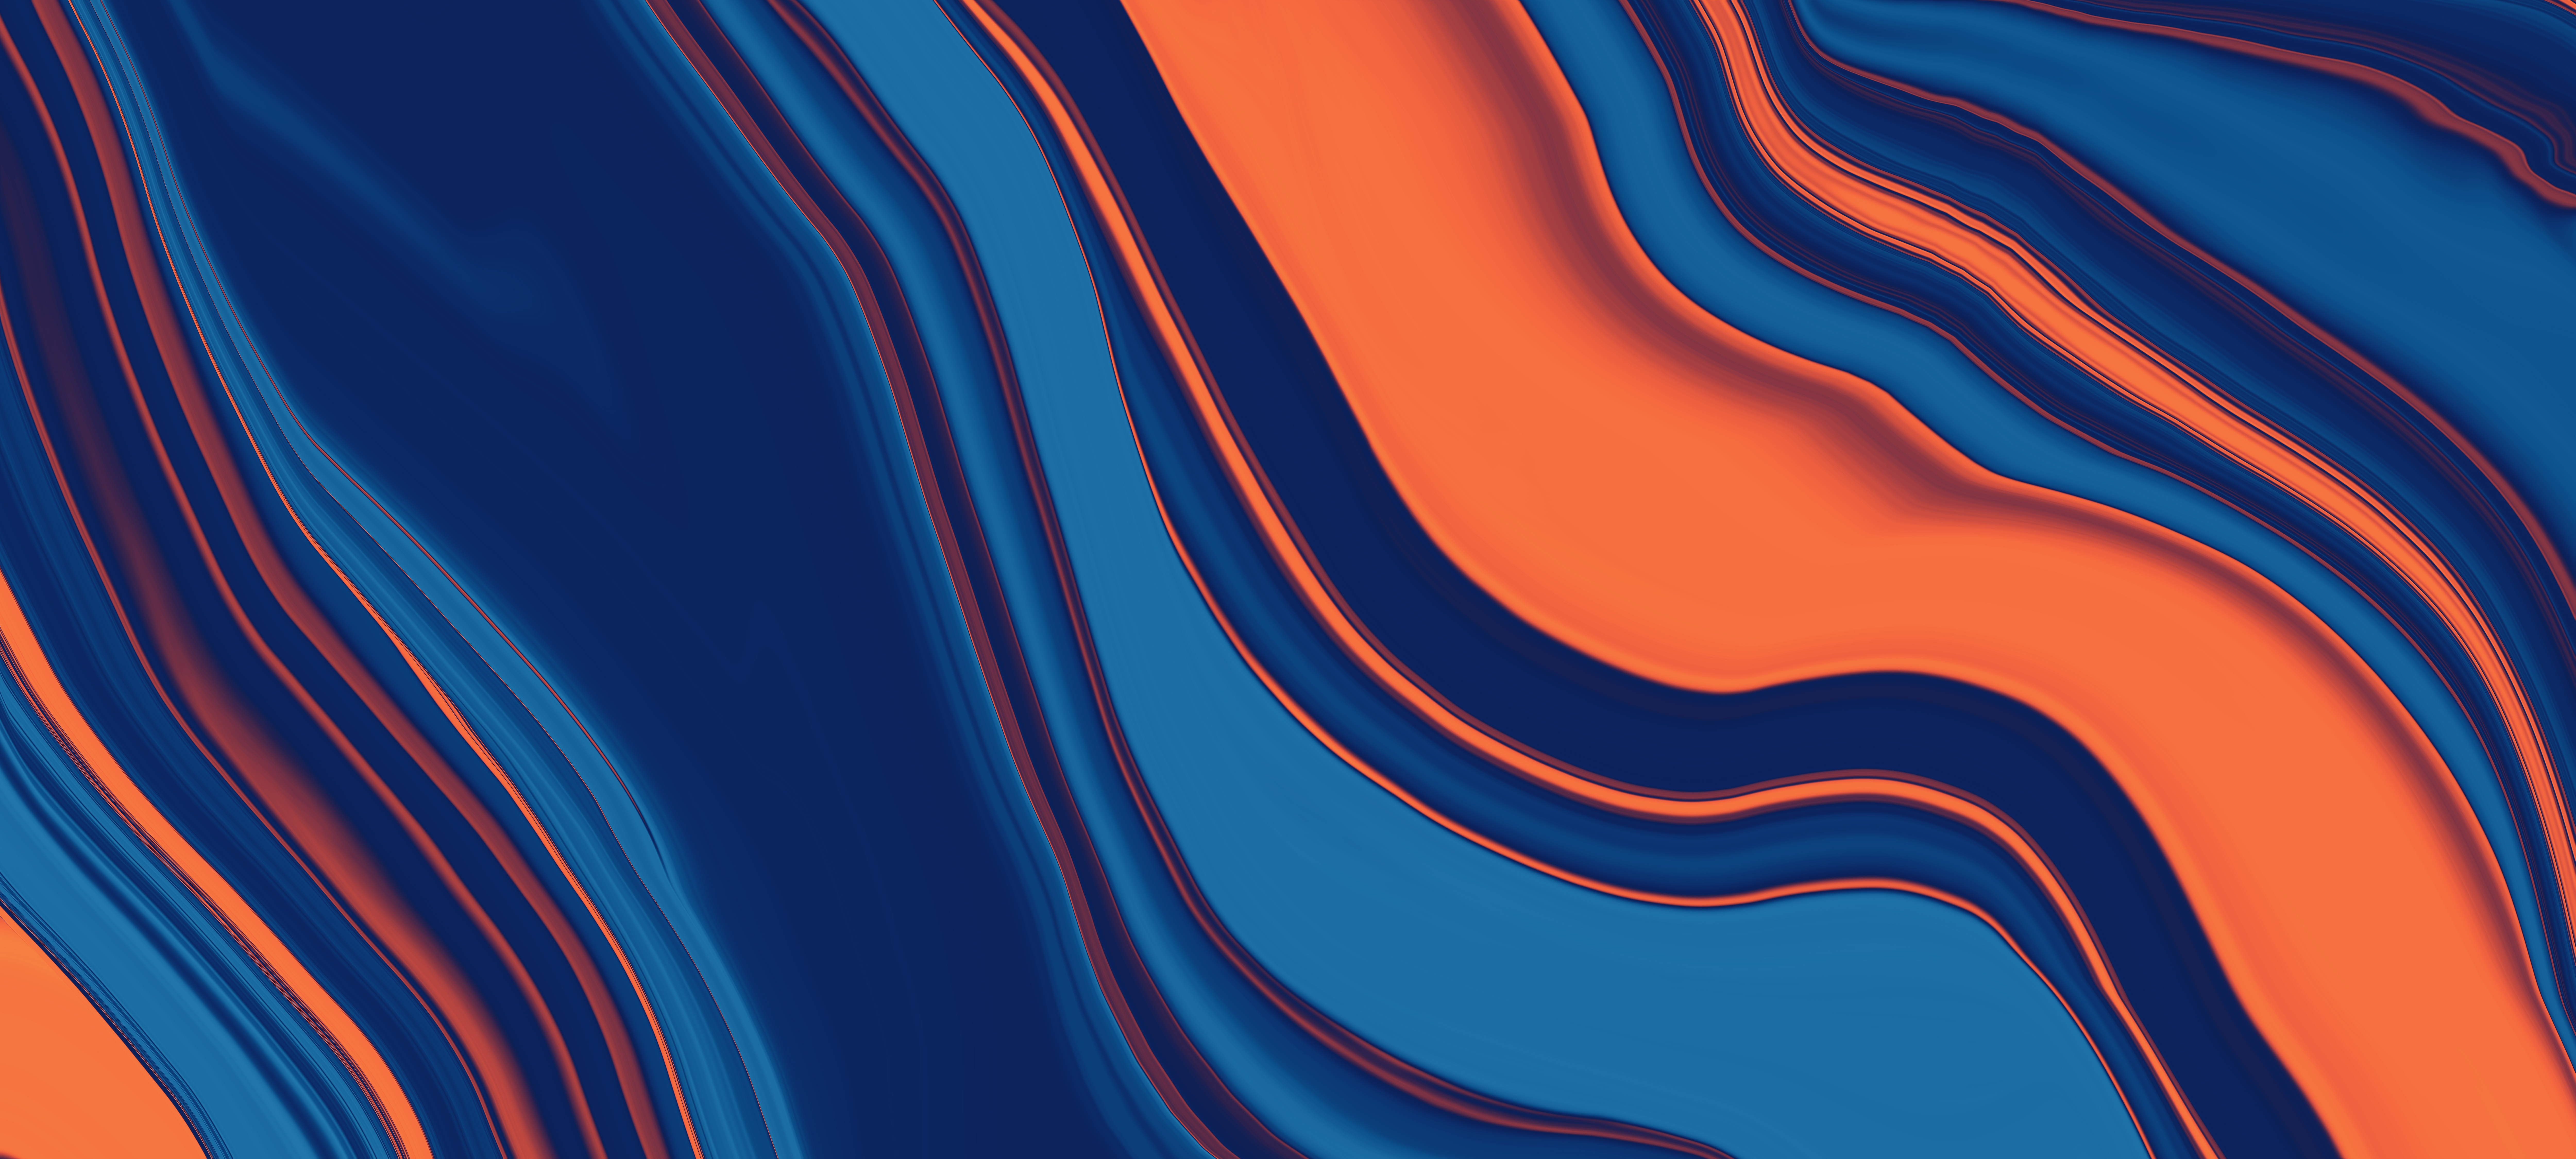 Abstract Fluid Digital Art Colorful Line Art Simple Background 10750x4838